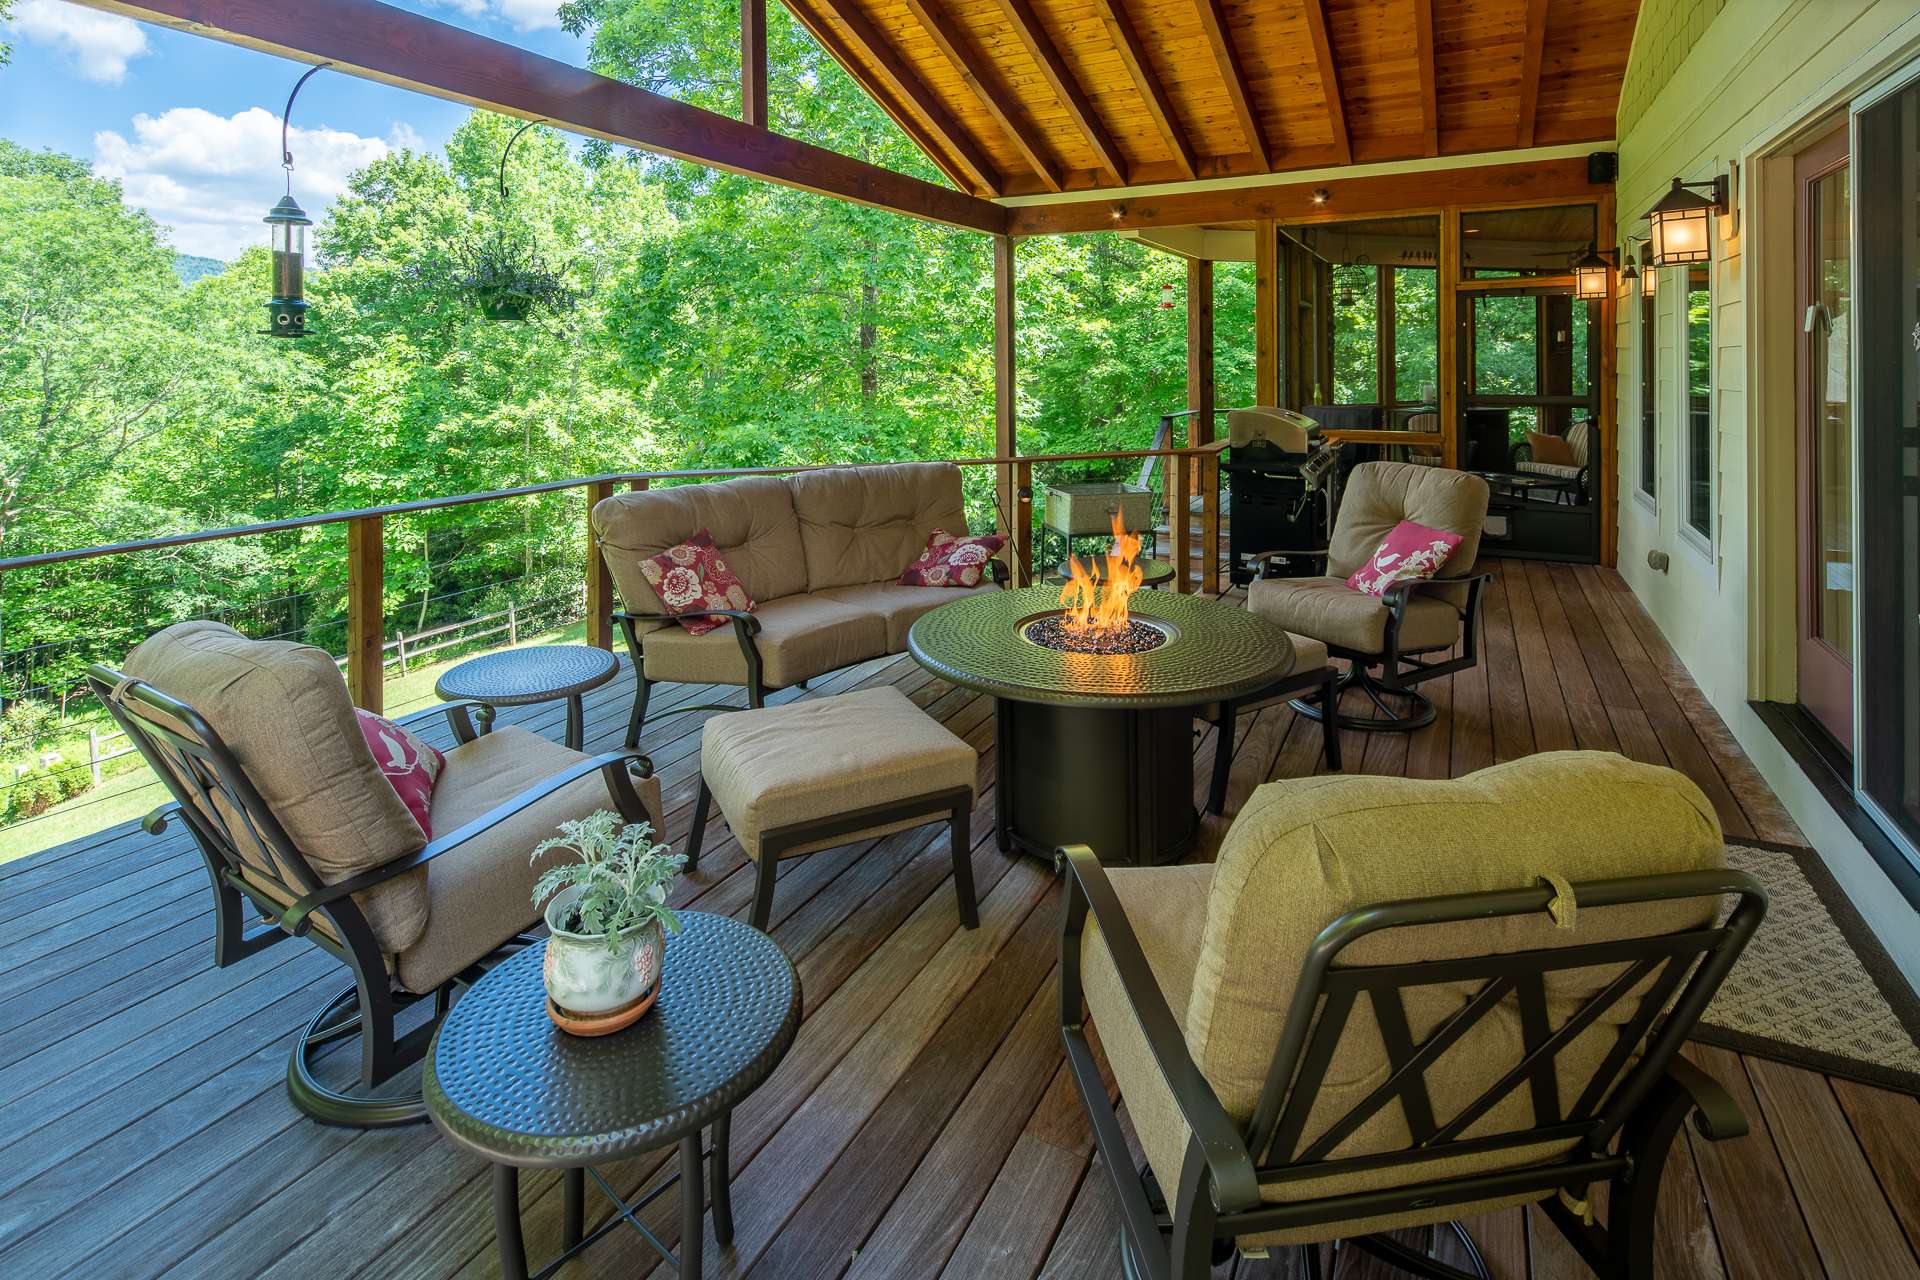 You’ll love the way the spacious great room expands onto this covered deck perfect for entertaining or spending relaxing evenings enjoying the quiet and peaceful surroundings.